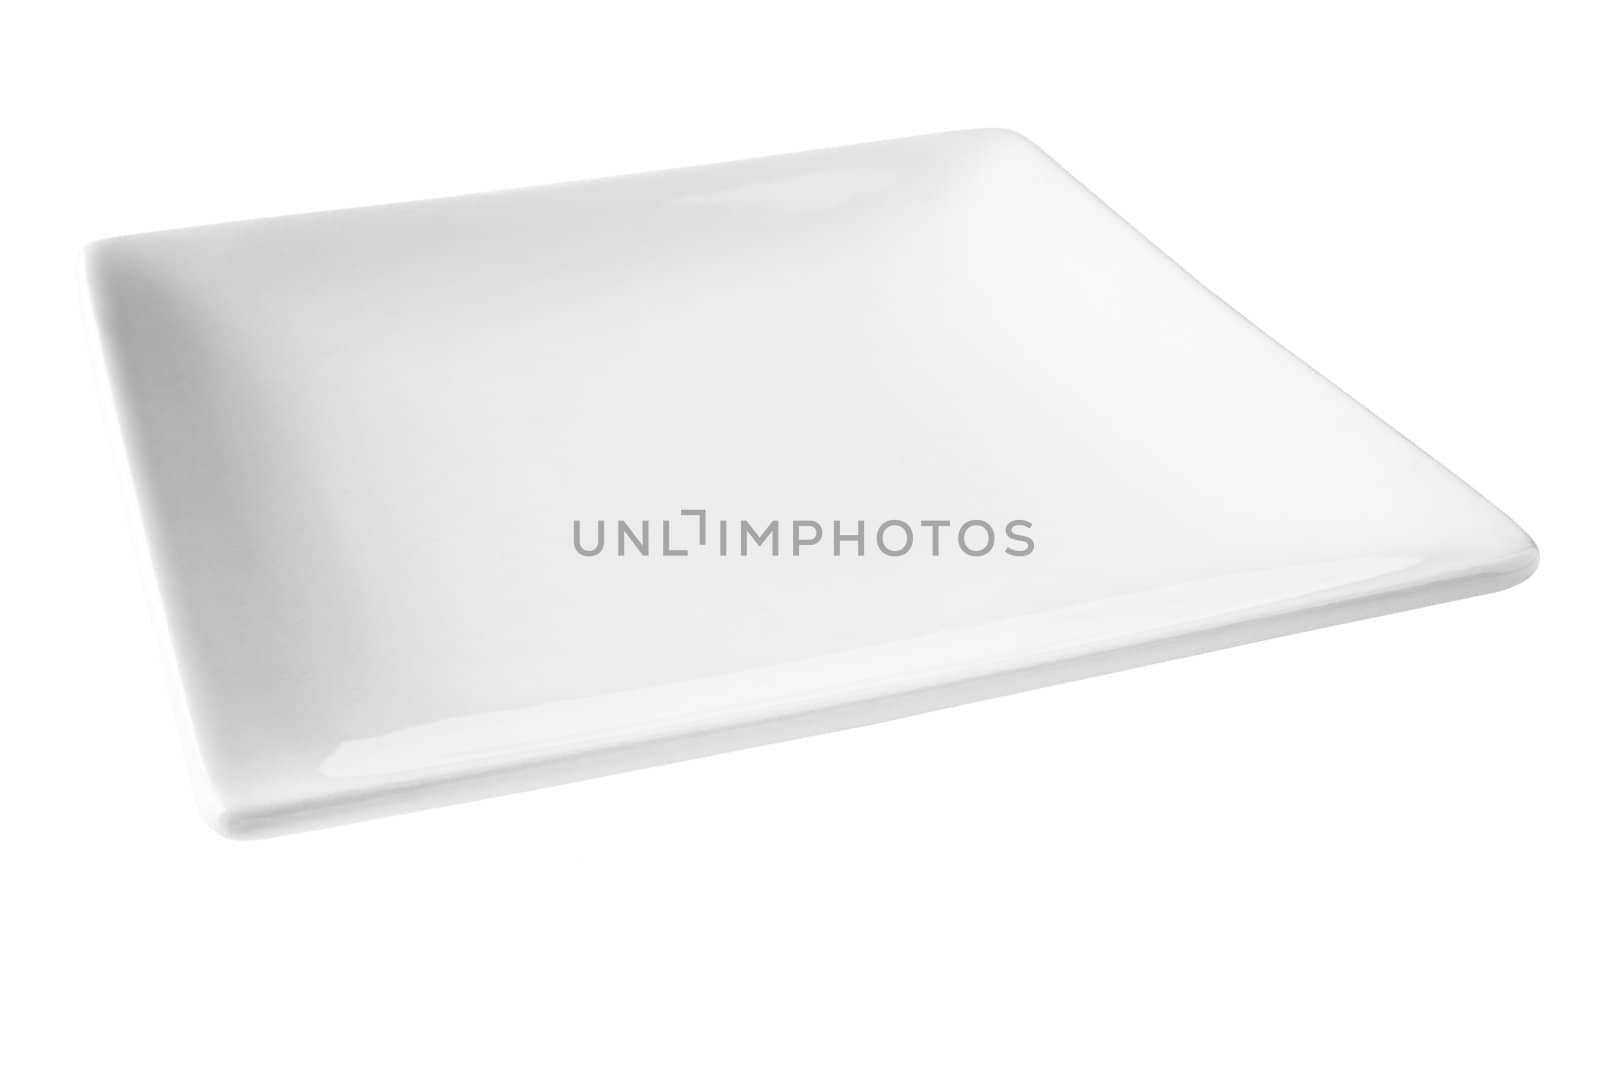 Square white porcelain plate, set at an angle, isloated on white and with clipping path included.